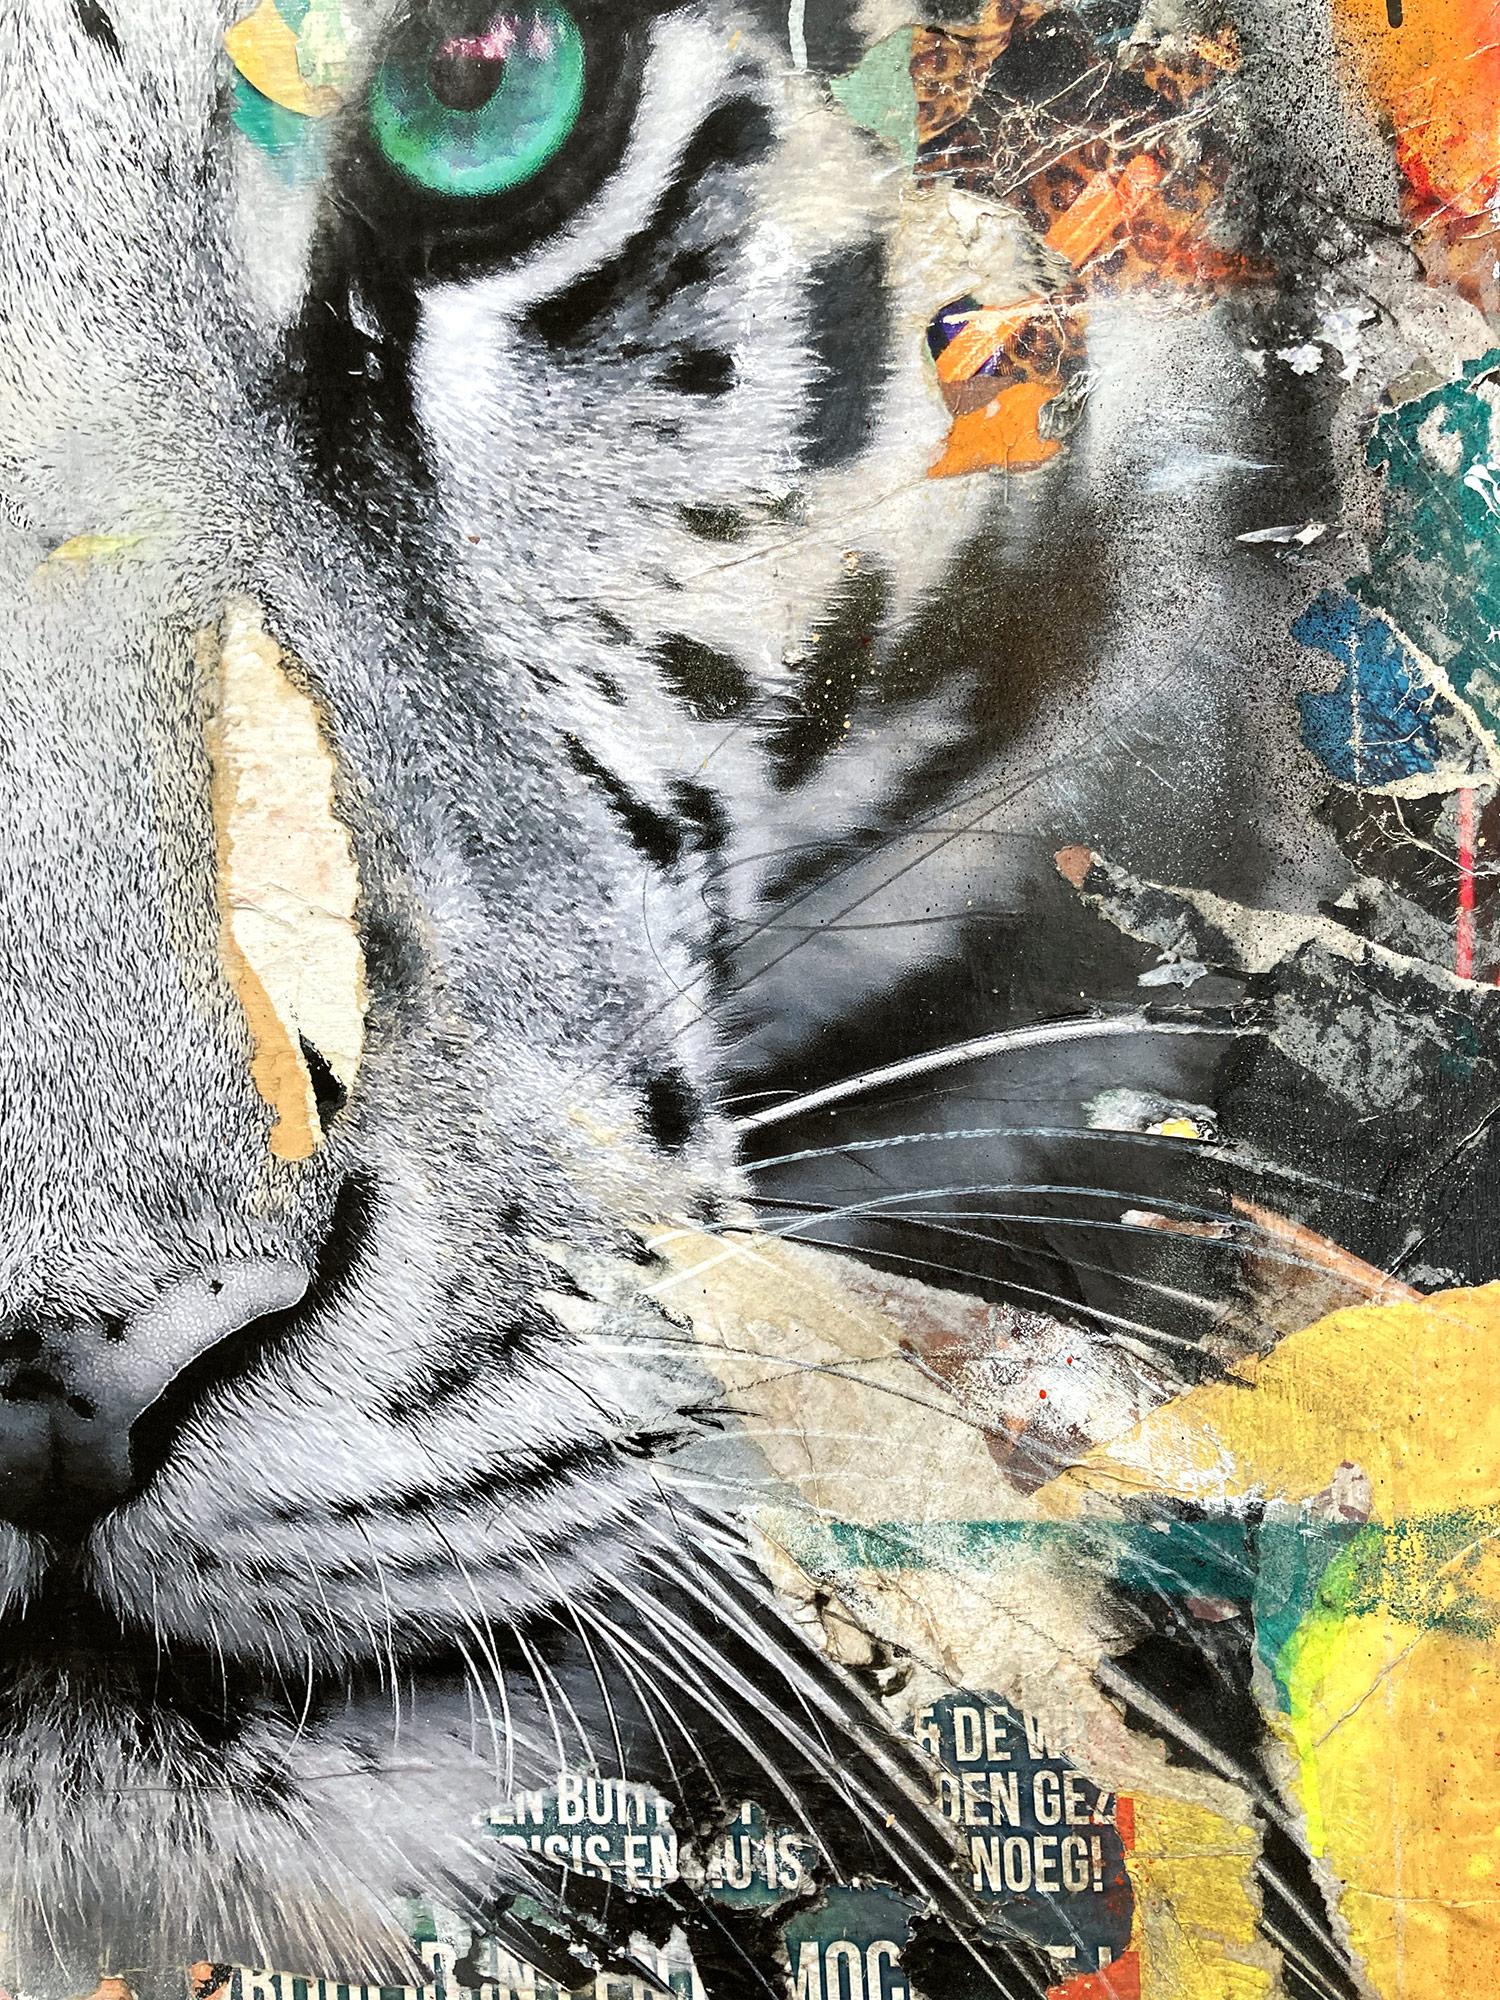 This piece depicts a Tiger done with beautiful expressive colors and a distinctive street art design, this piece pops with energy and romantic beauty. Its composition and bold collage make a wonderful statement and have an edgy and elegant